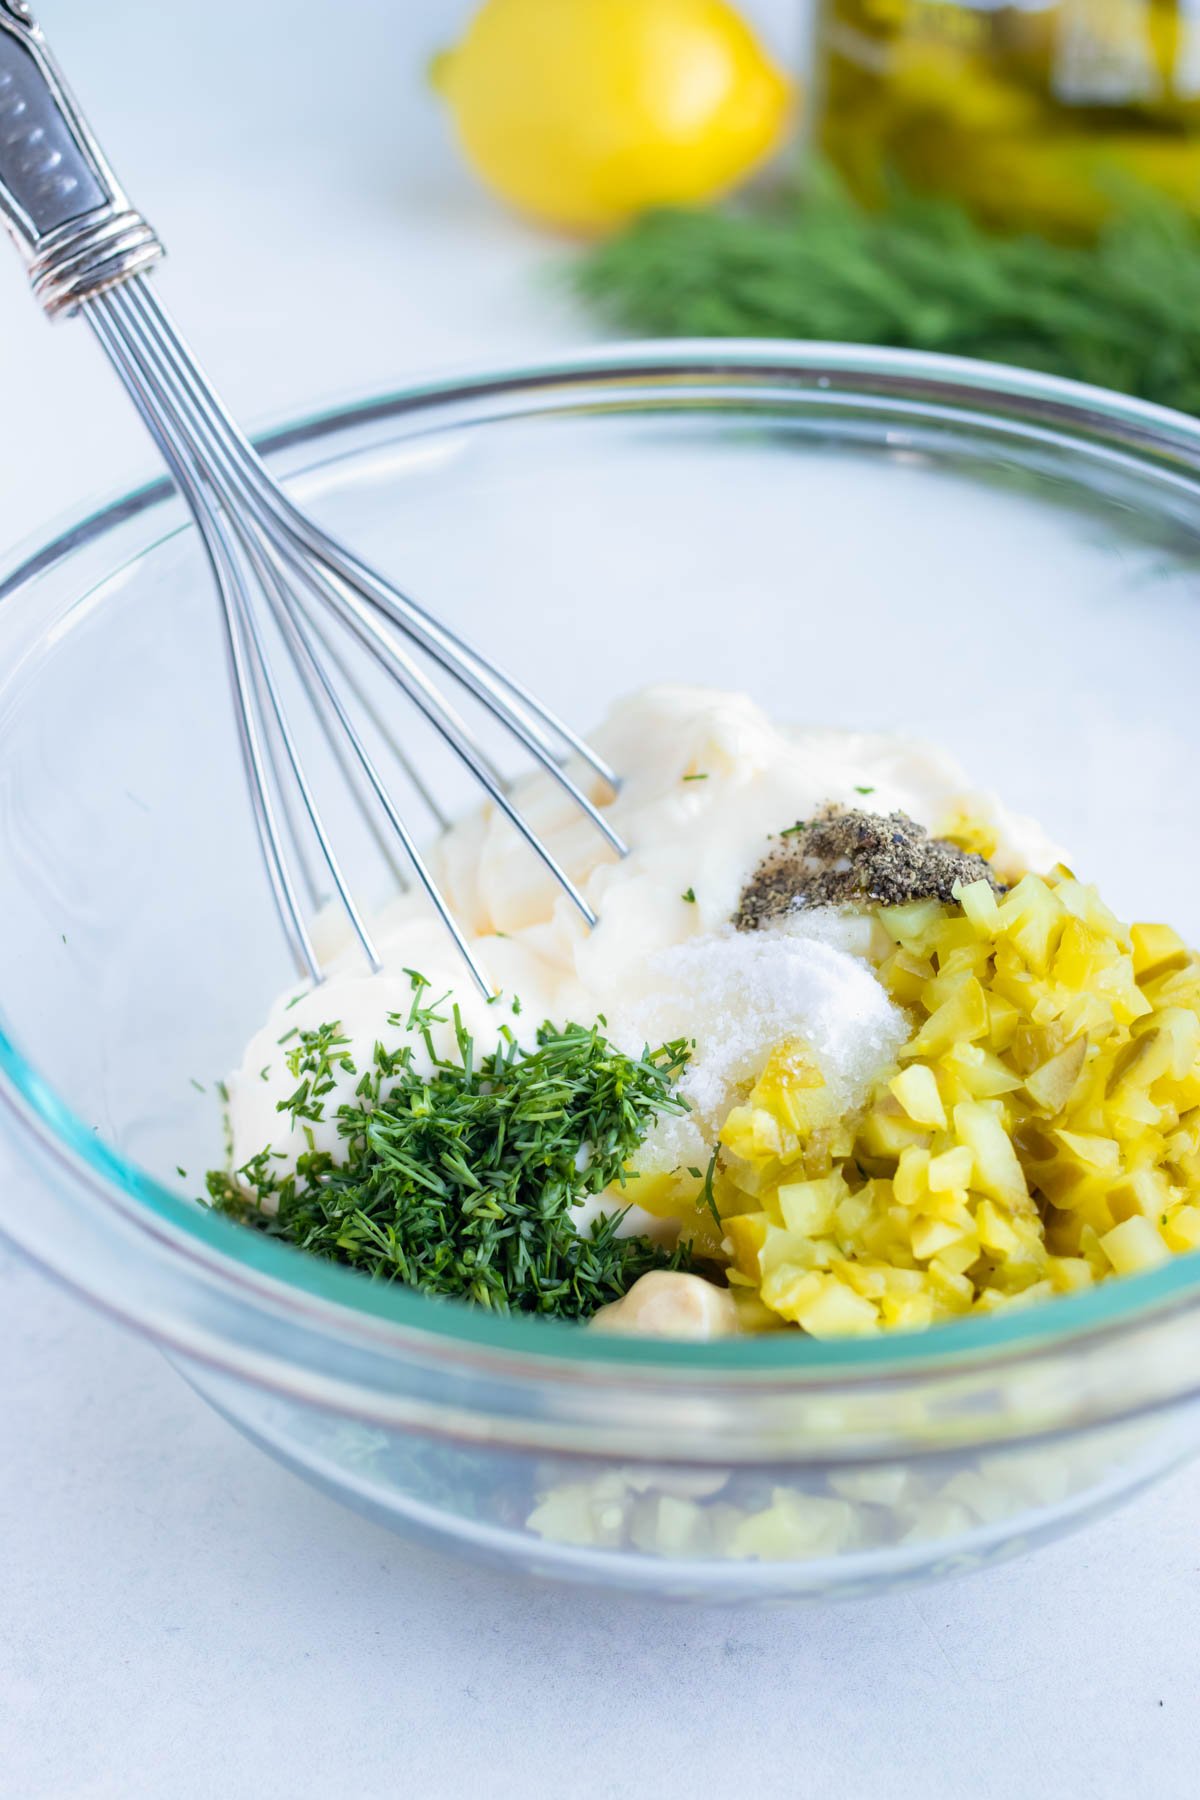 All ingredients for this homemade tartar sauce are whisked together.